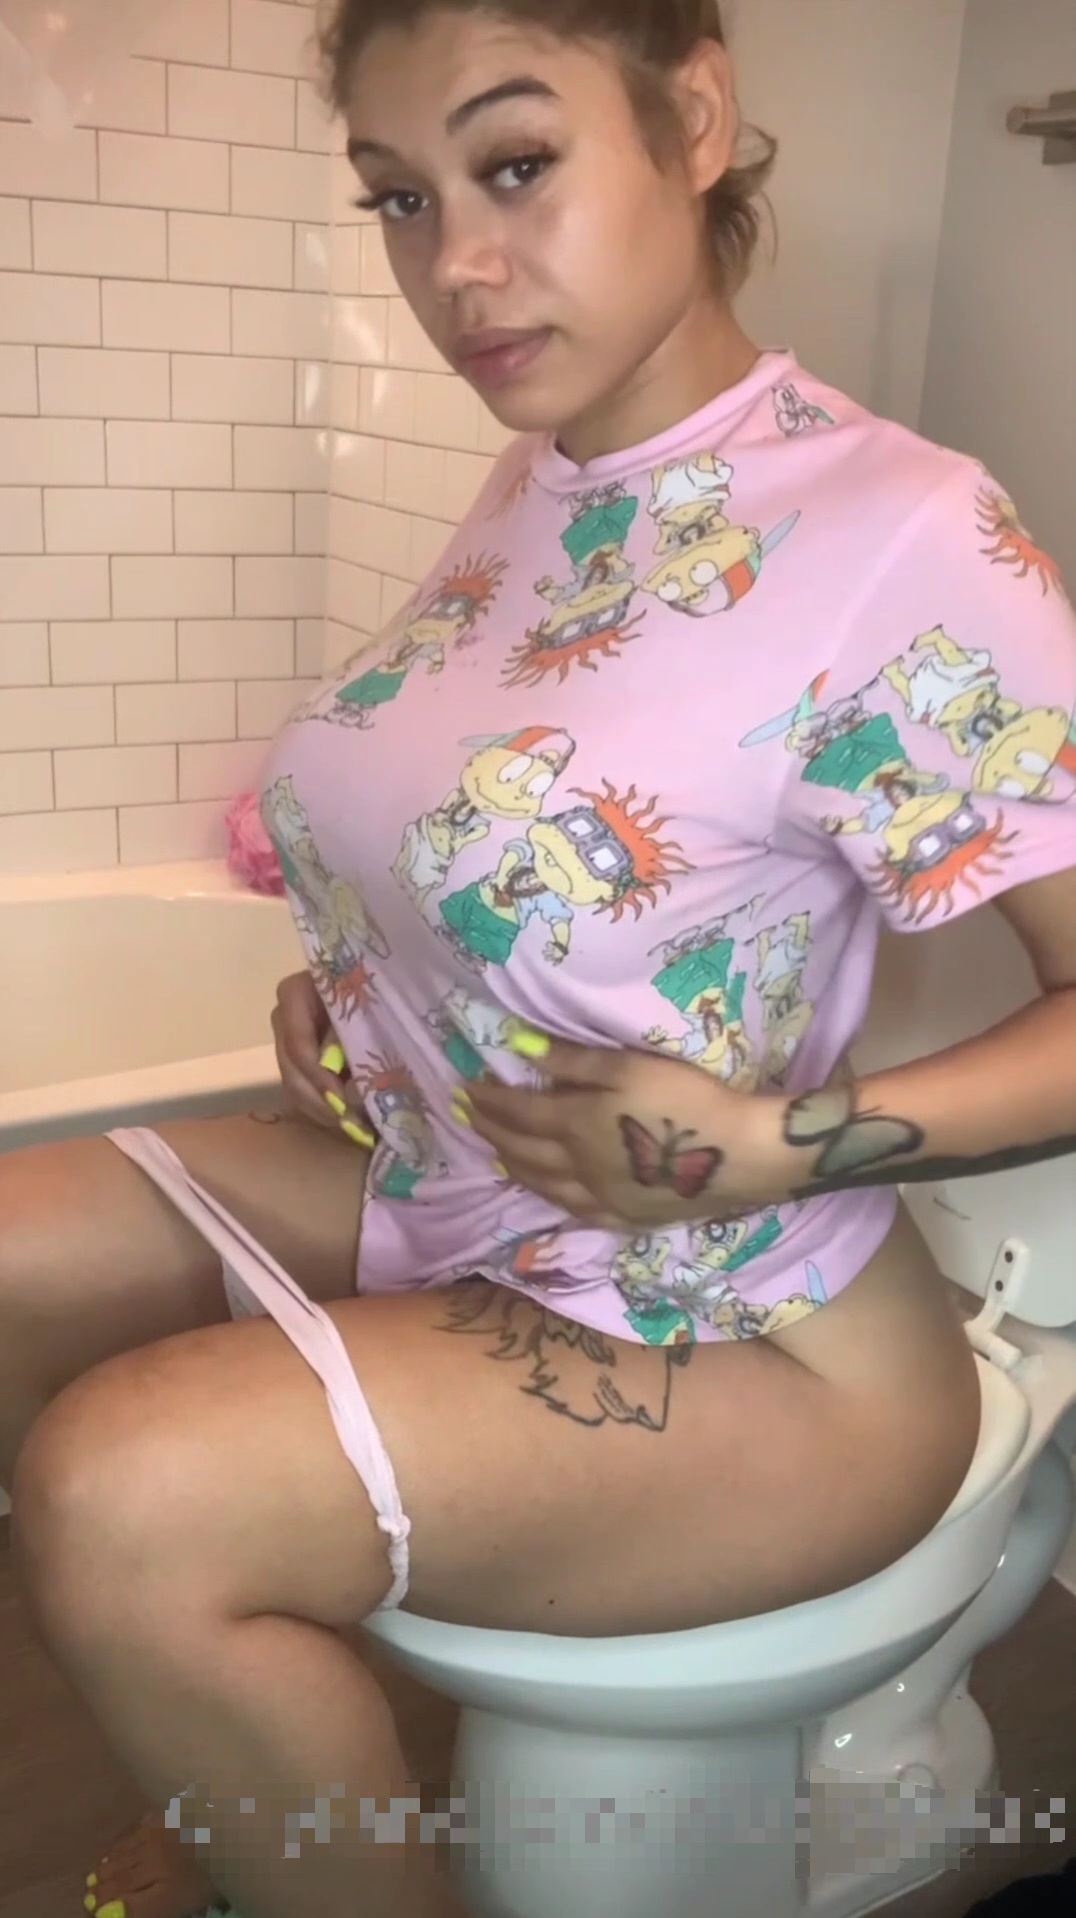 Tattooed Latina Shitting On Toilet (No Scat Visible) picture